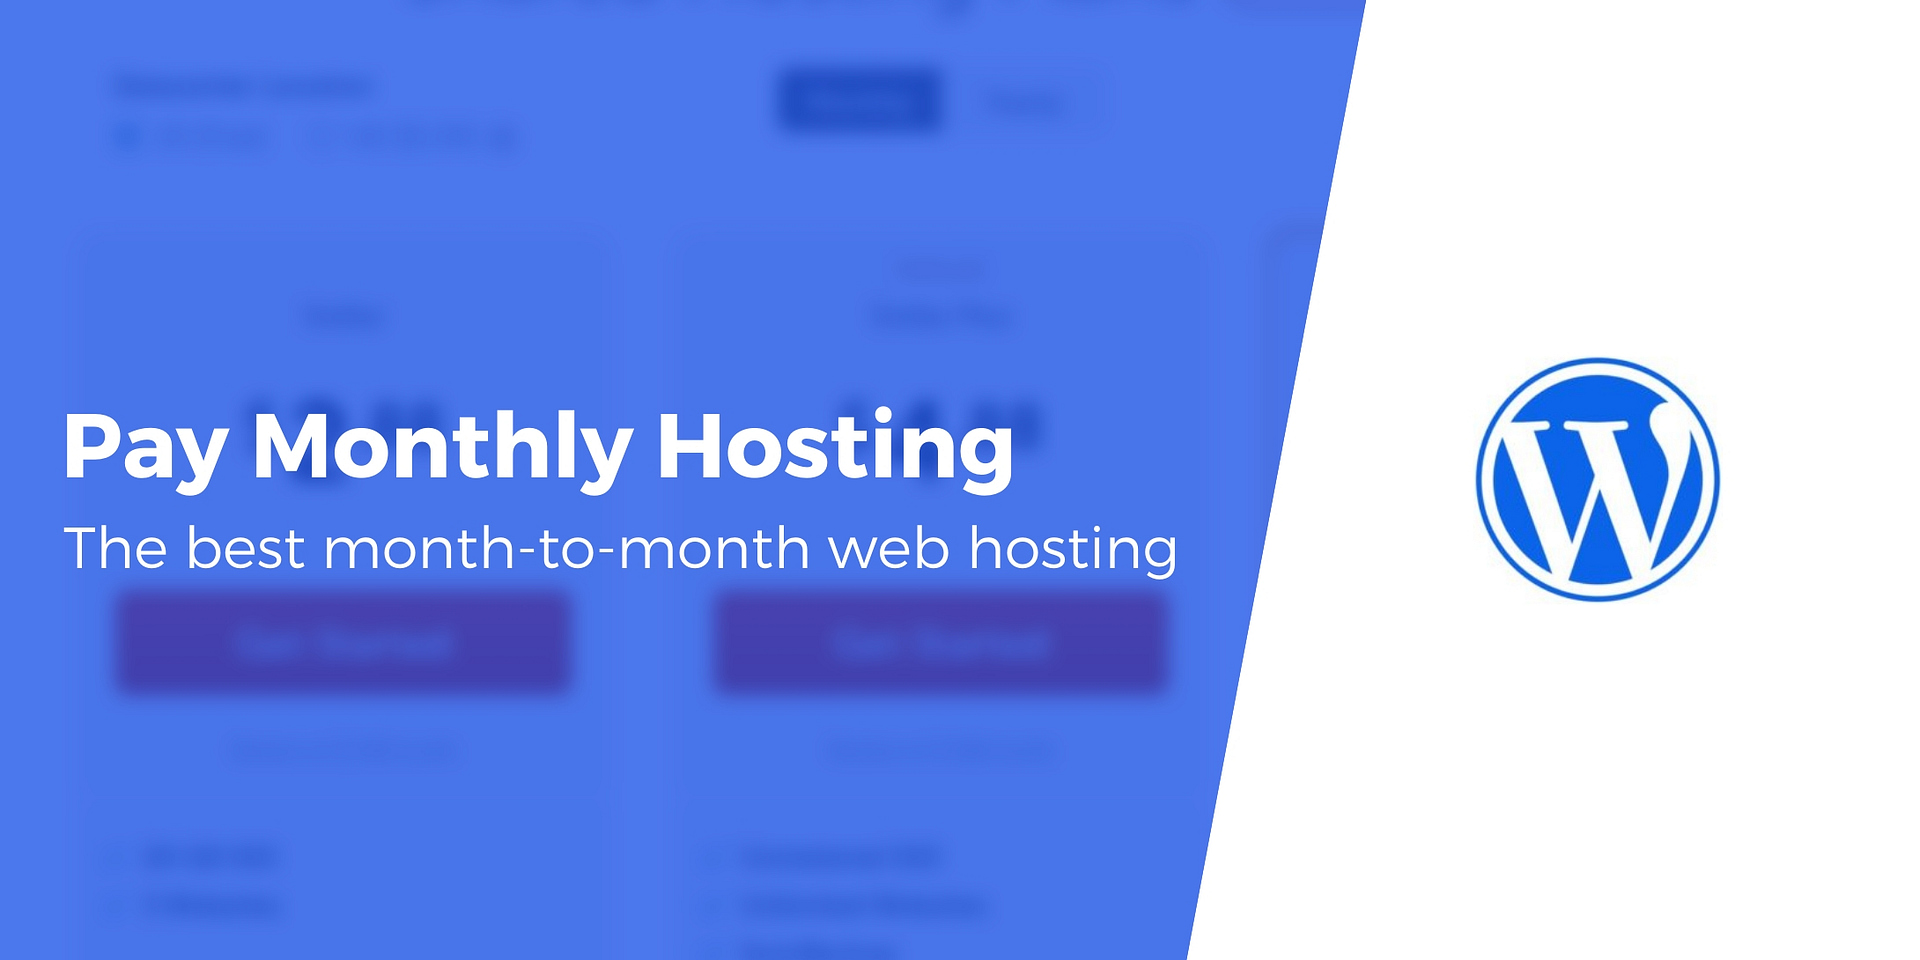 20 Best Monthly Web Hosting - Pay month-to-month & Save Money